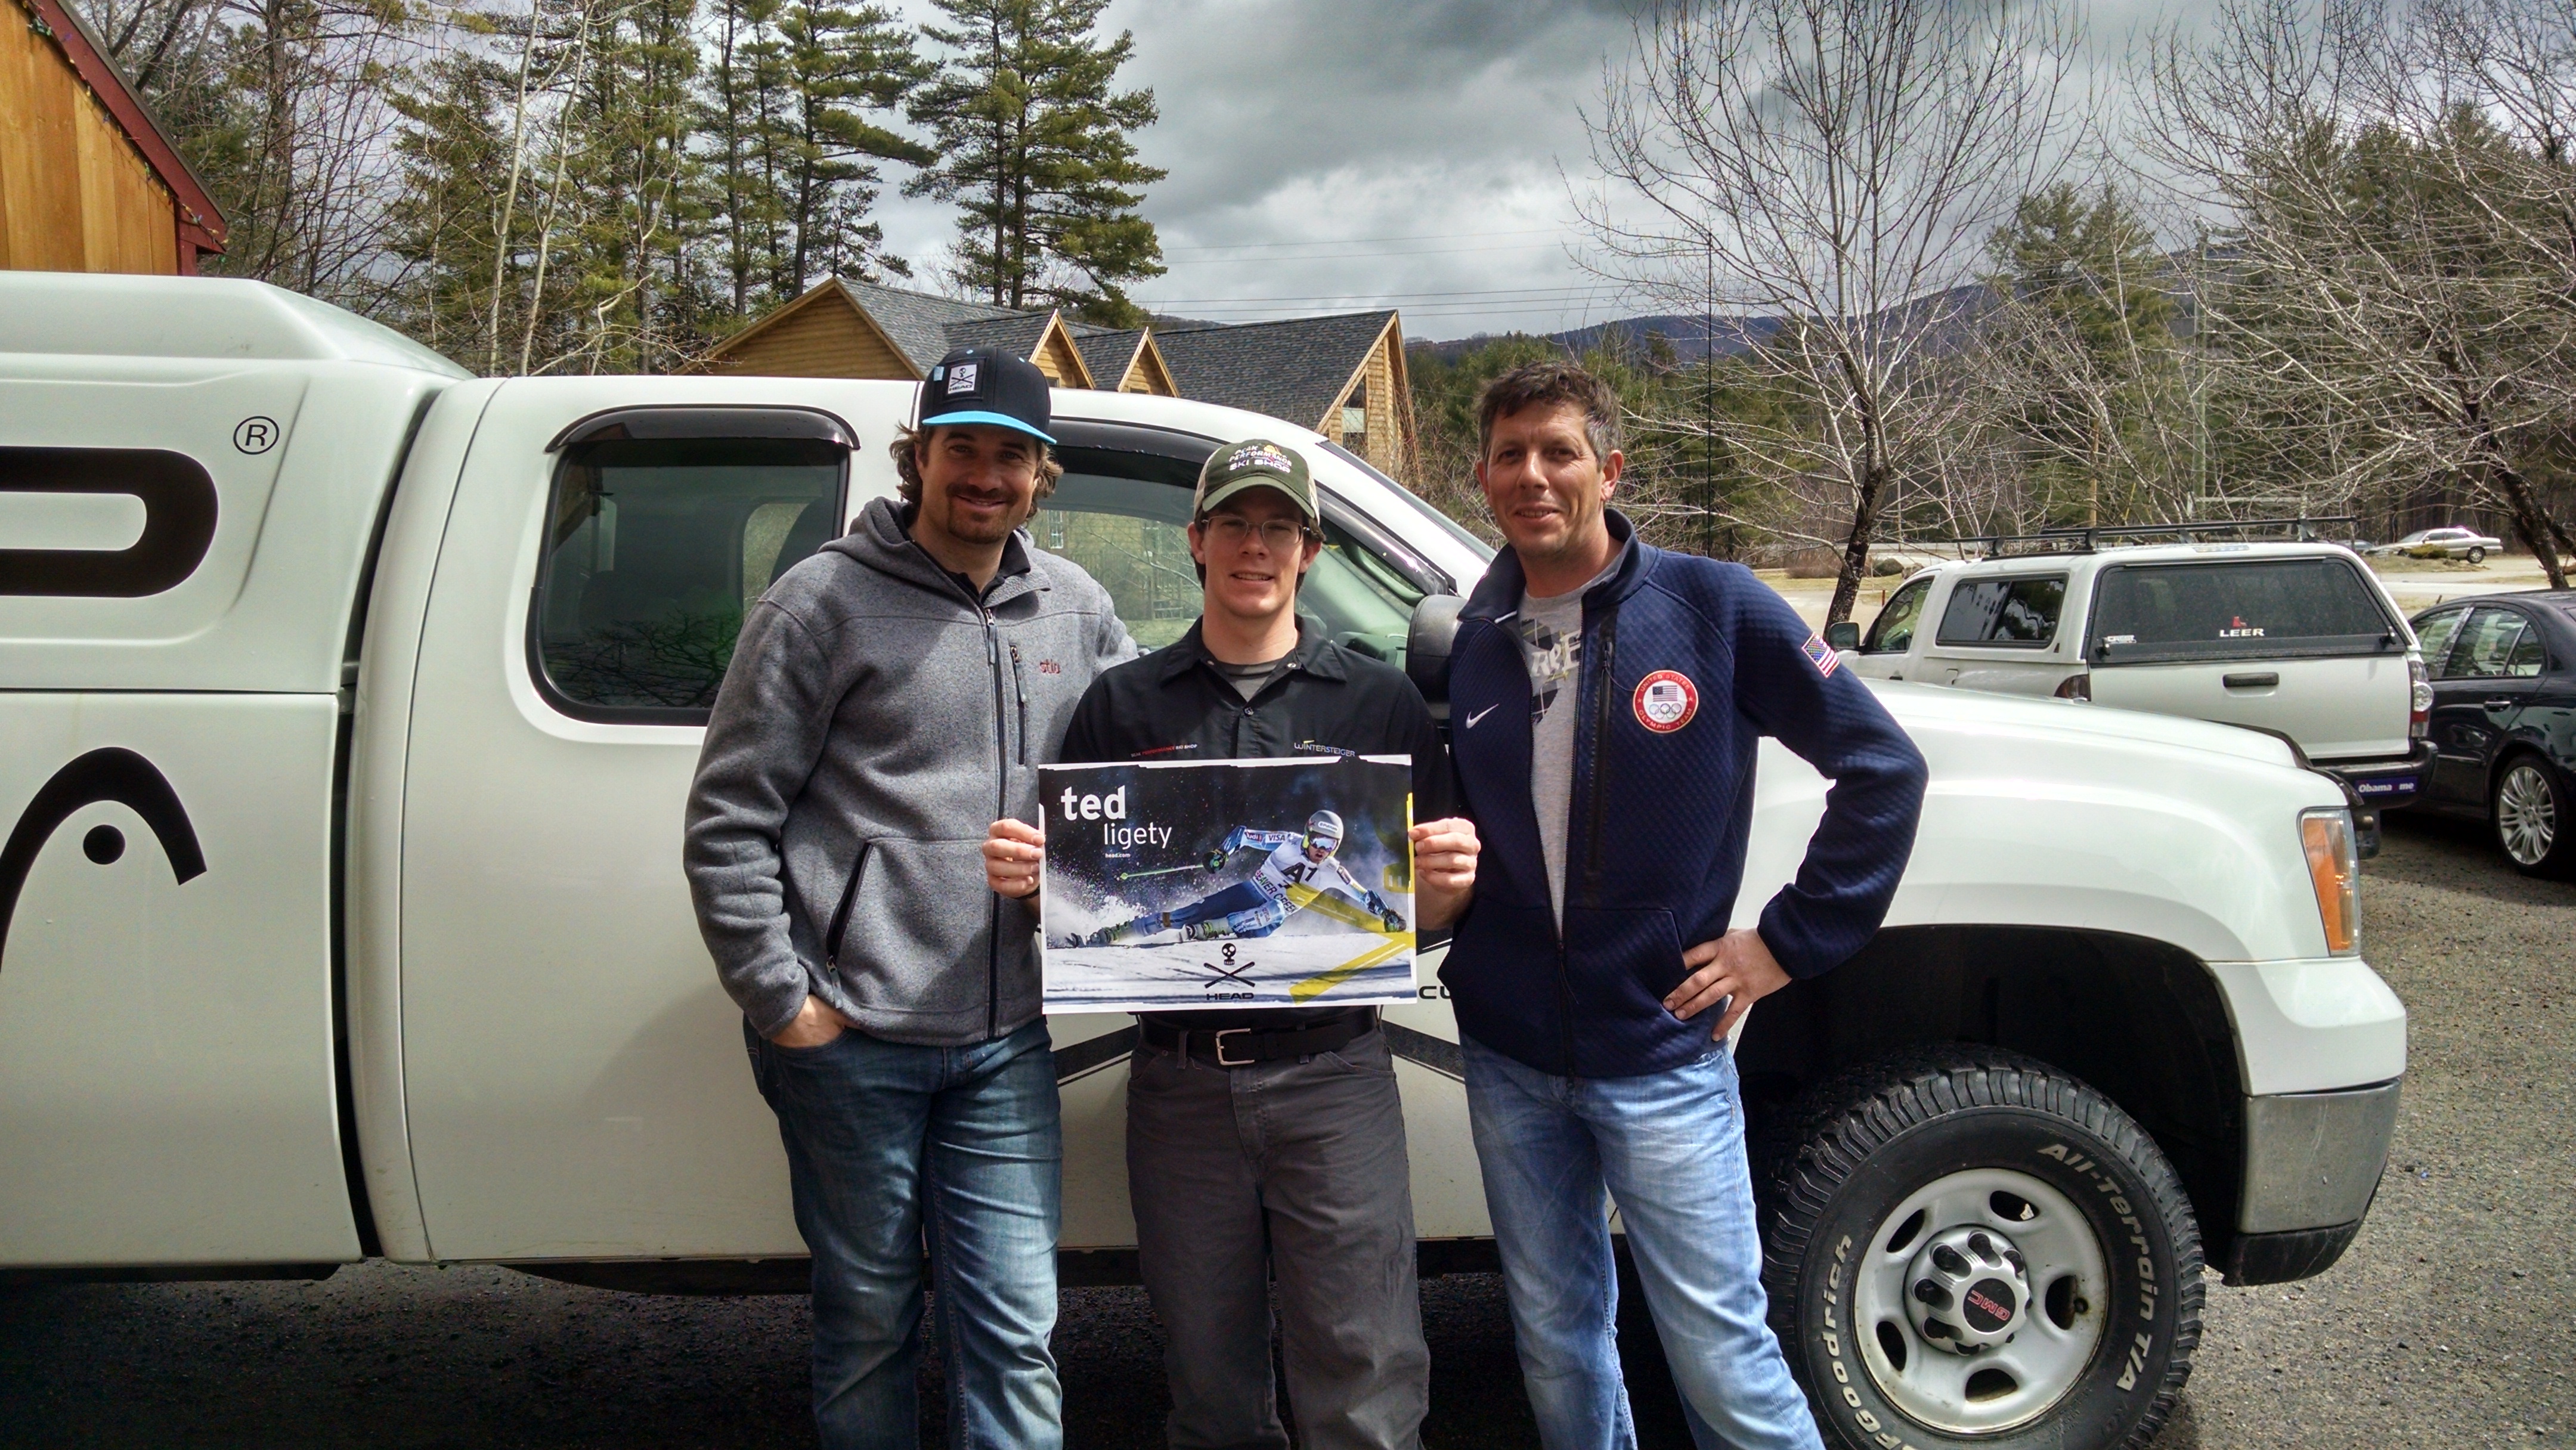 Head Skis race rep Ben Drummond, Will McKay from Peak Performance Ski Shop and Ted Ligety's ski technician Alex Martin at the 2015 Head SKis Hand Tuning Clinic in West Campton, NH.